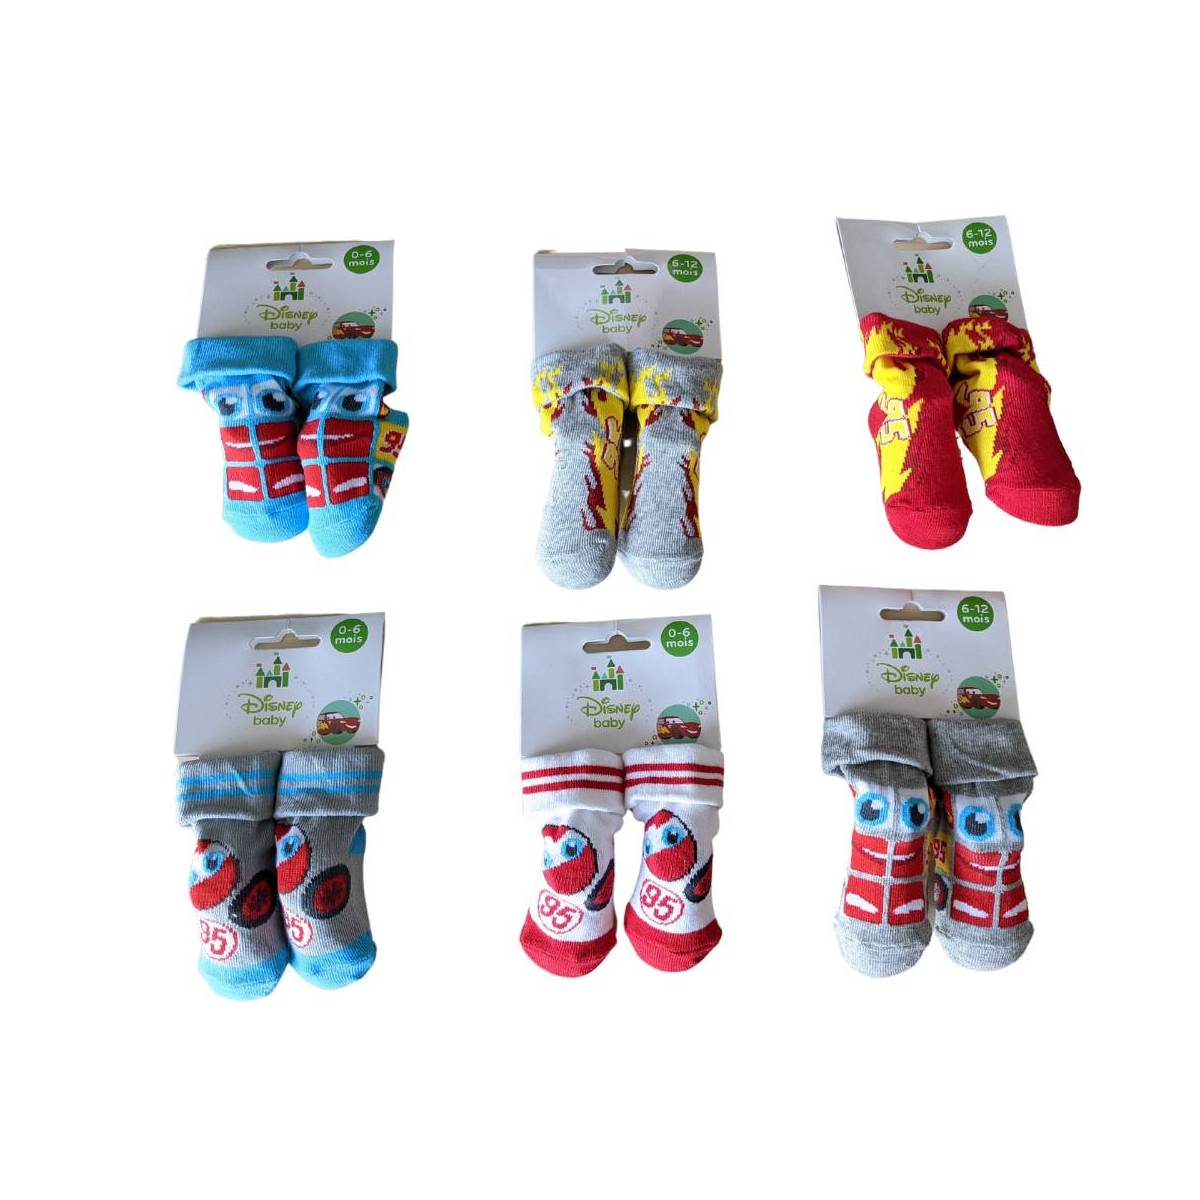 Cars socks 0 to 6 months and 6 to 12 months